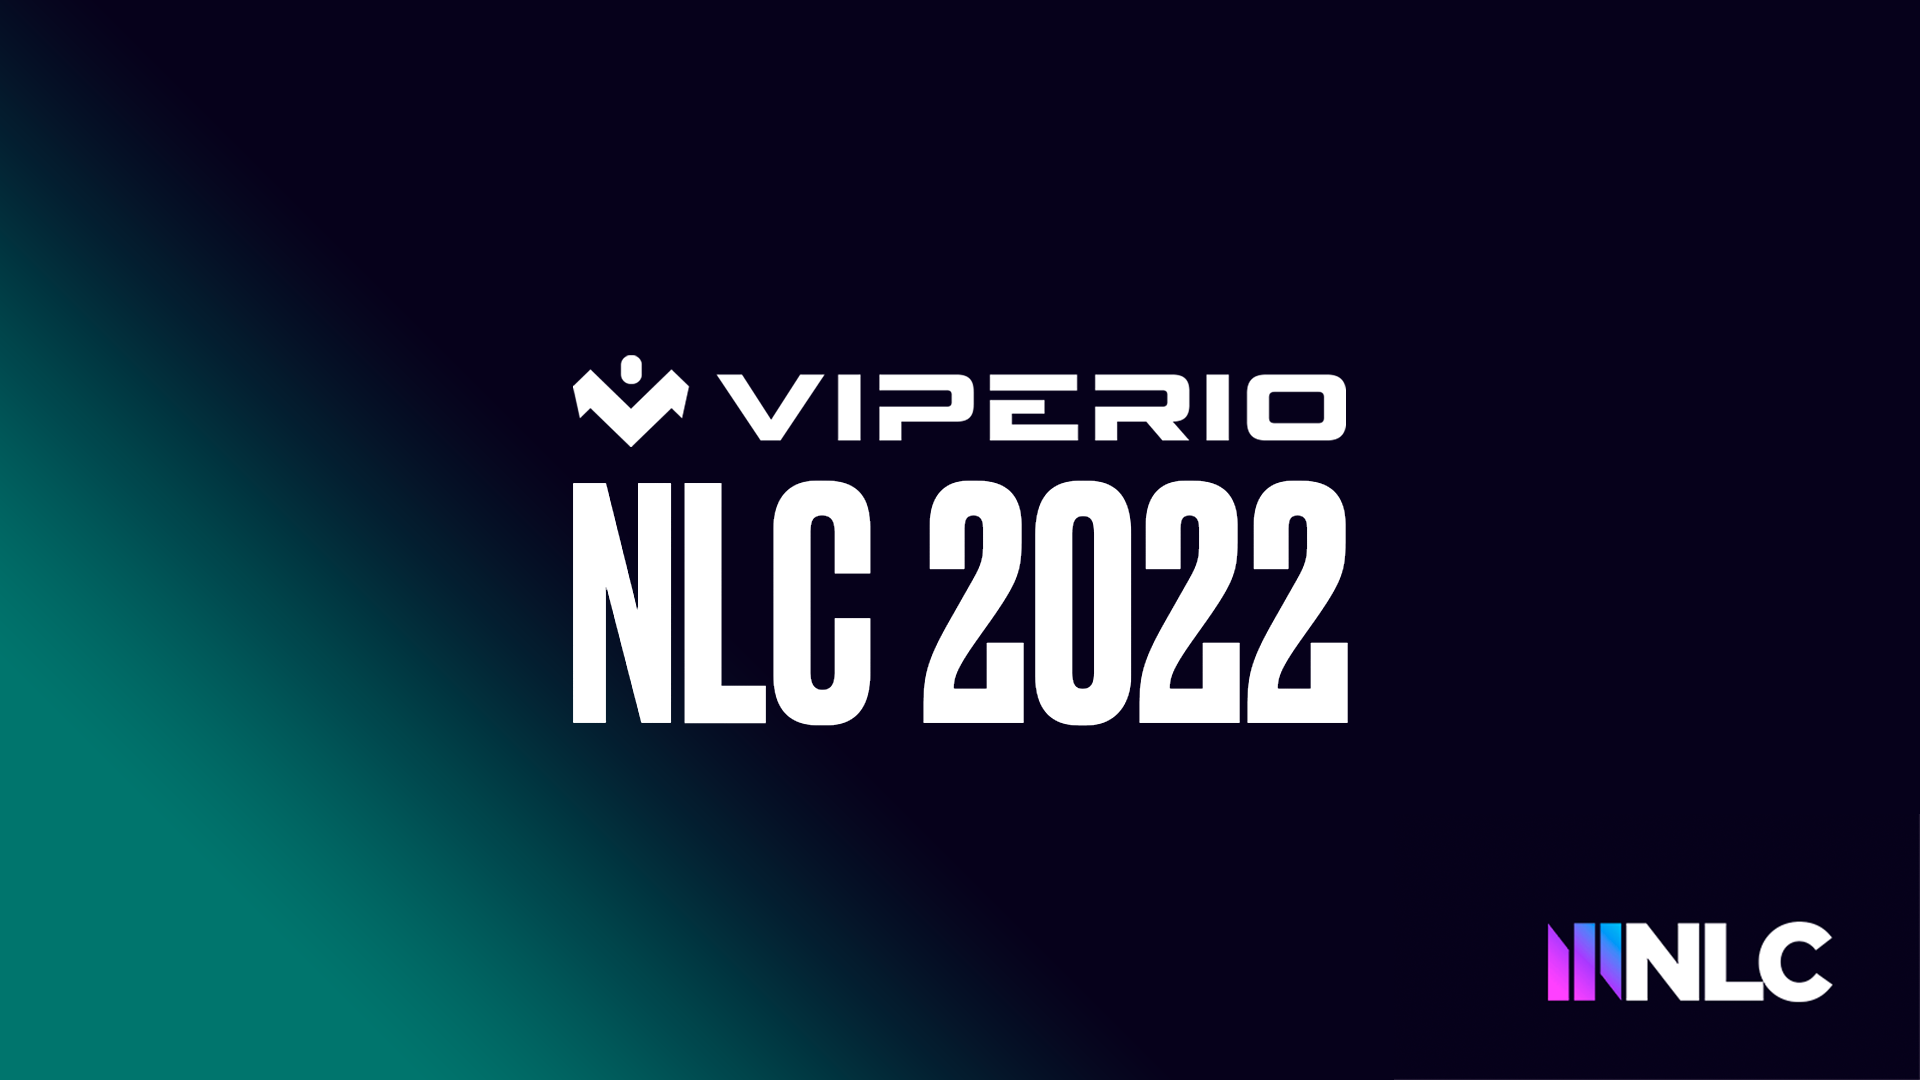 Presenting Viperio League of Legends Spring 2022